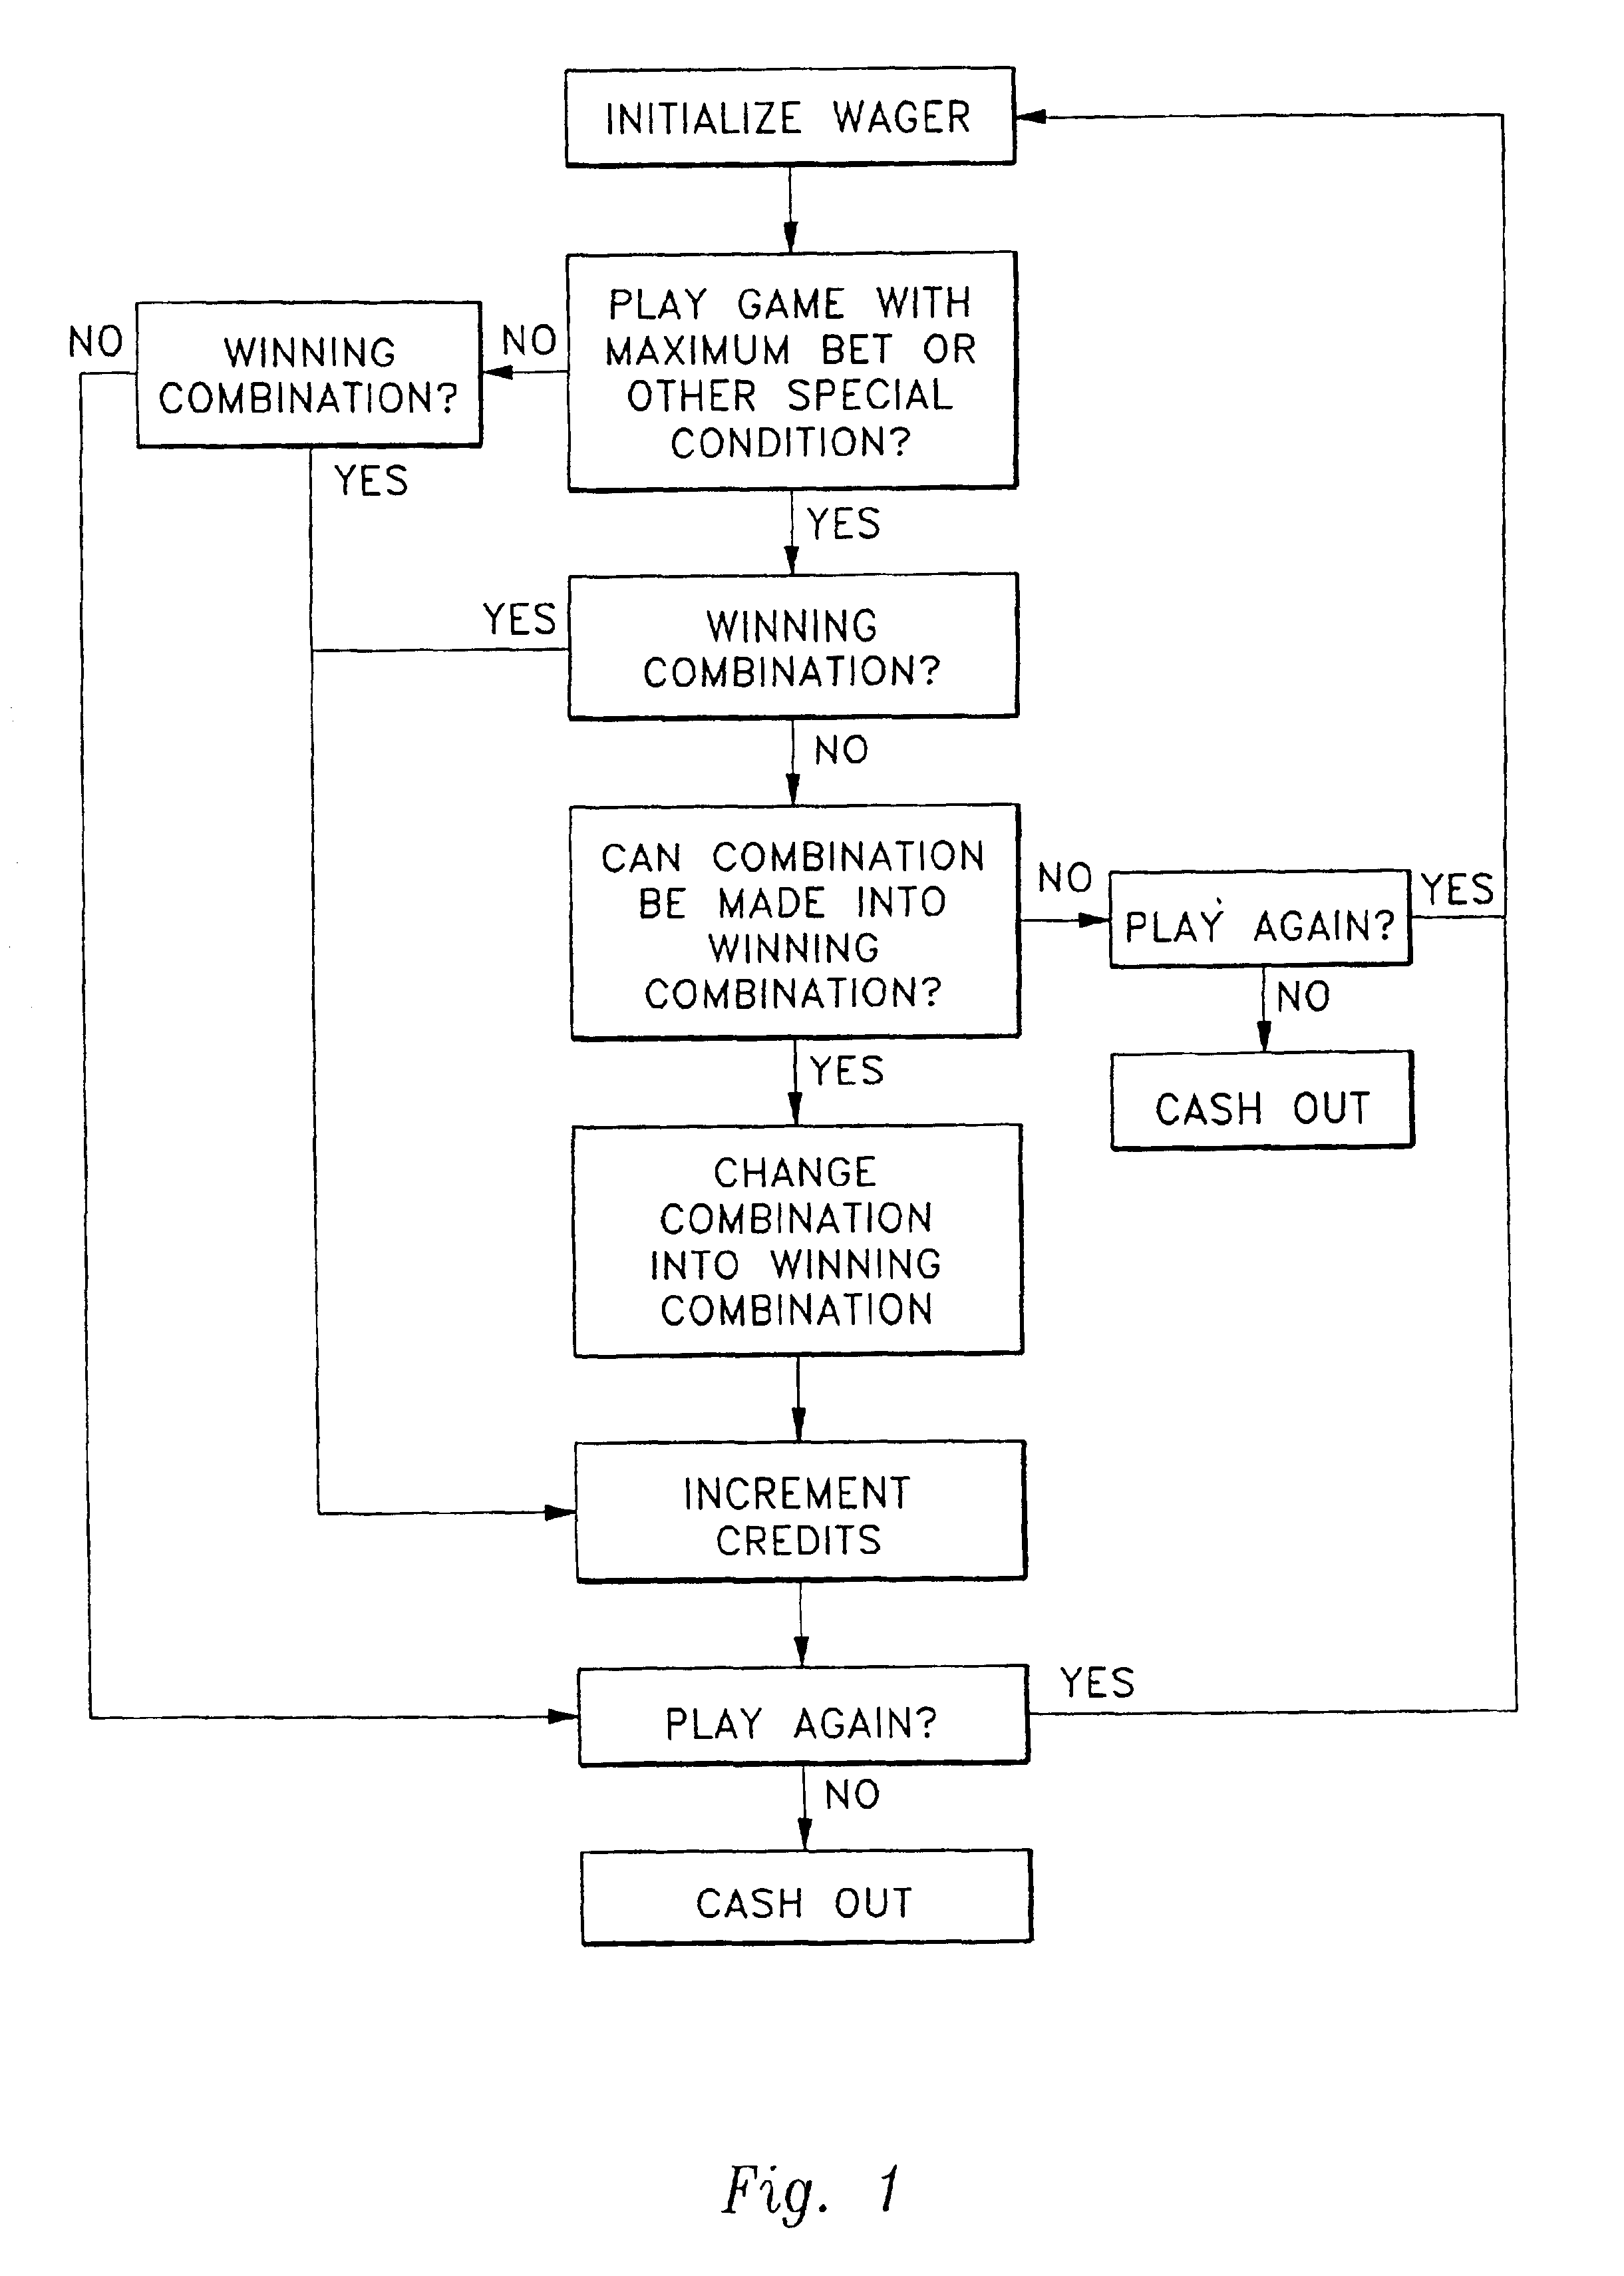 Gaming device and method